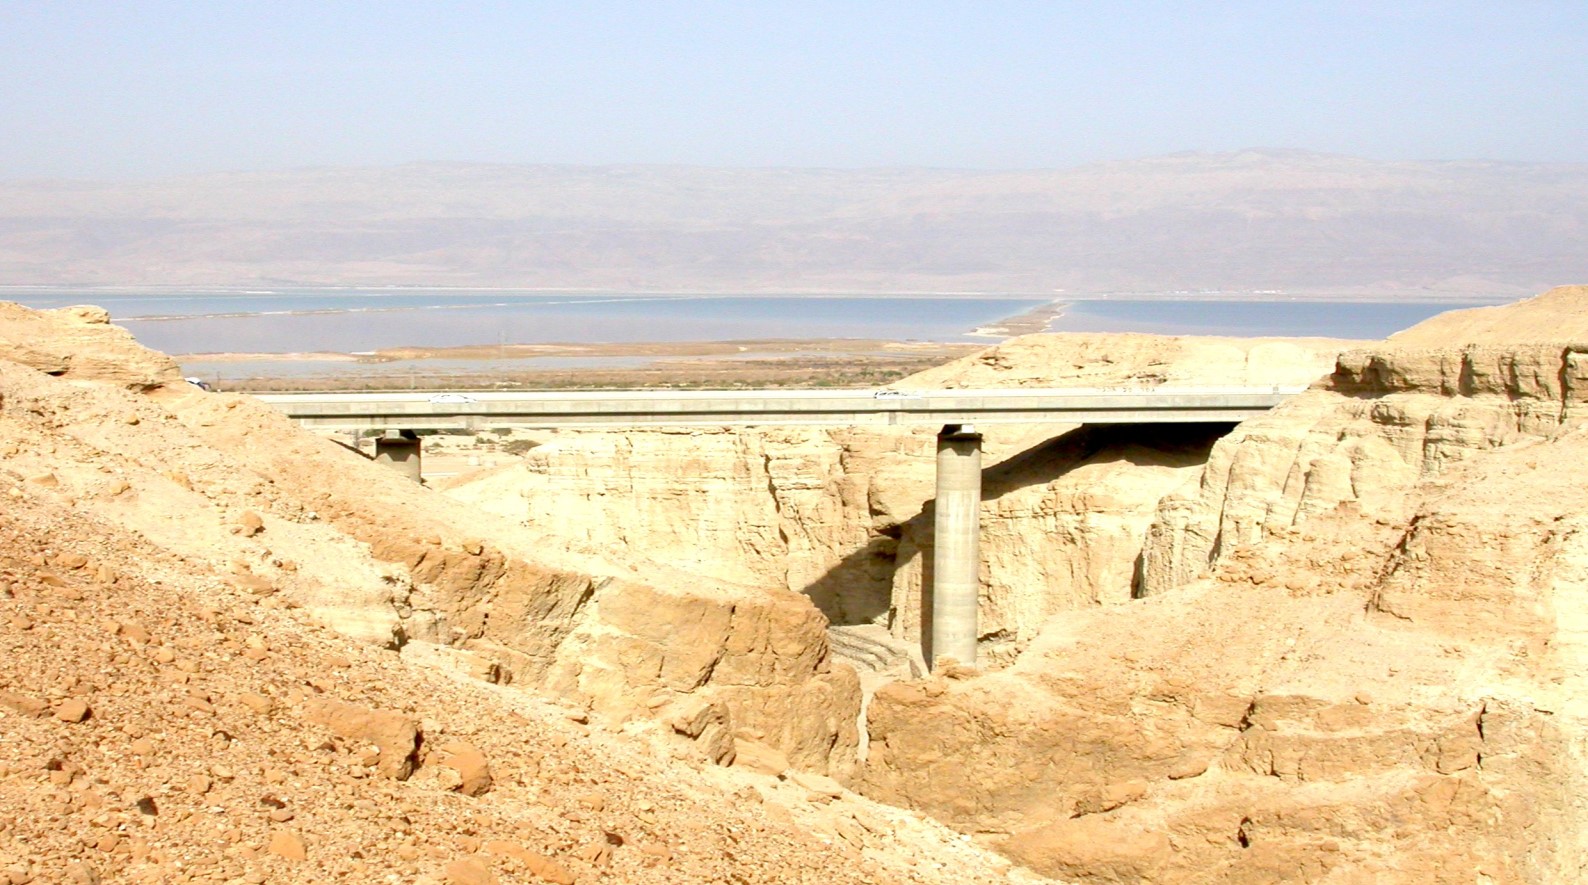 The Zohar Bridge with the Dead Sea in the background. Photo by Izhak Stern/YDE Engineers